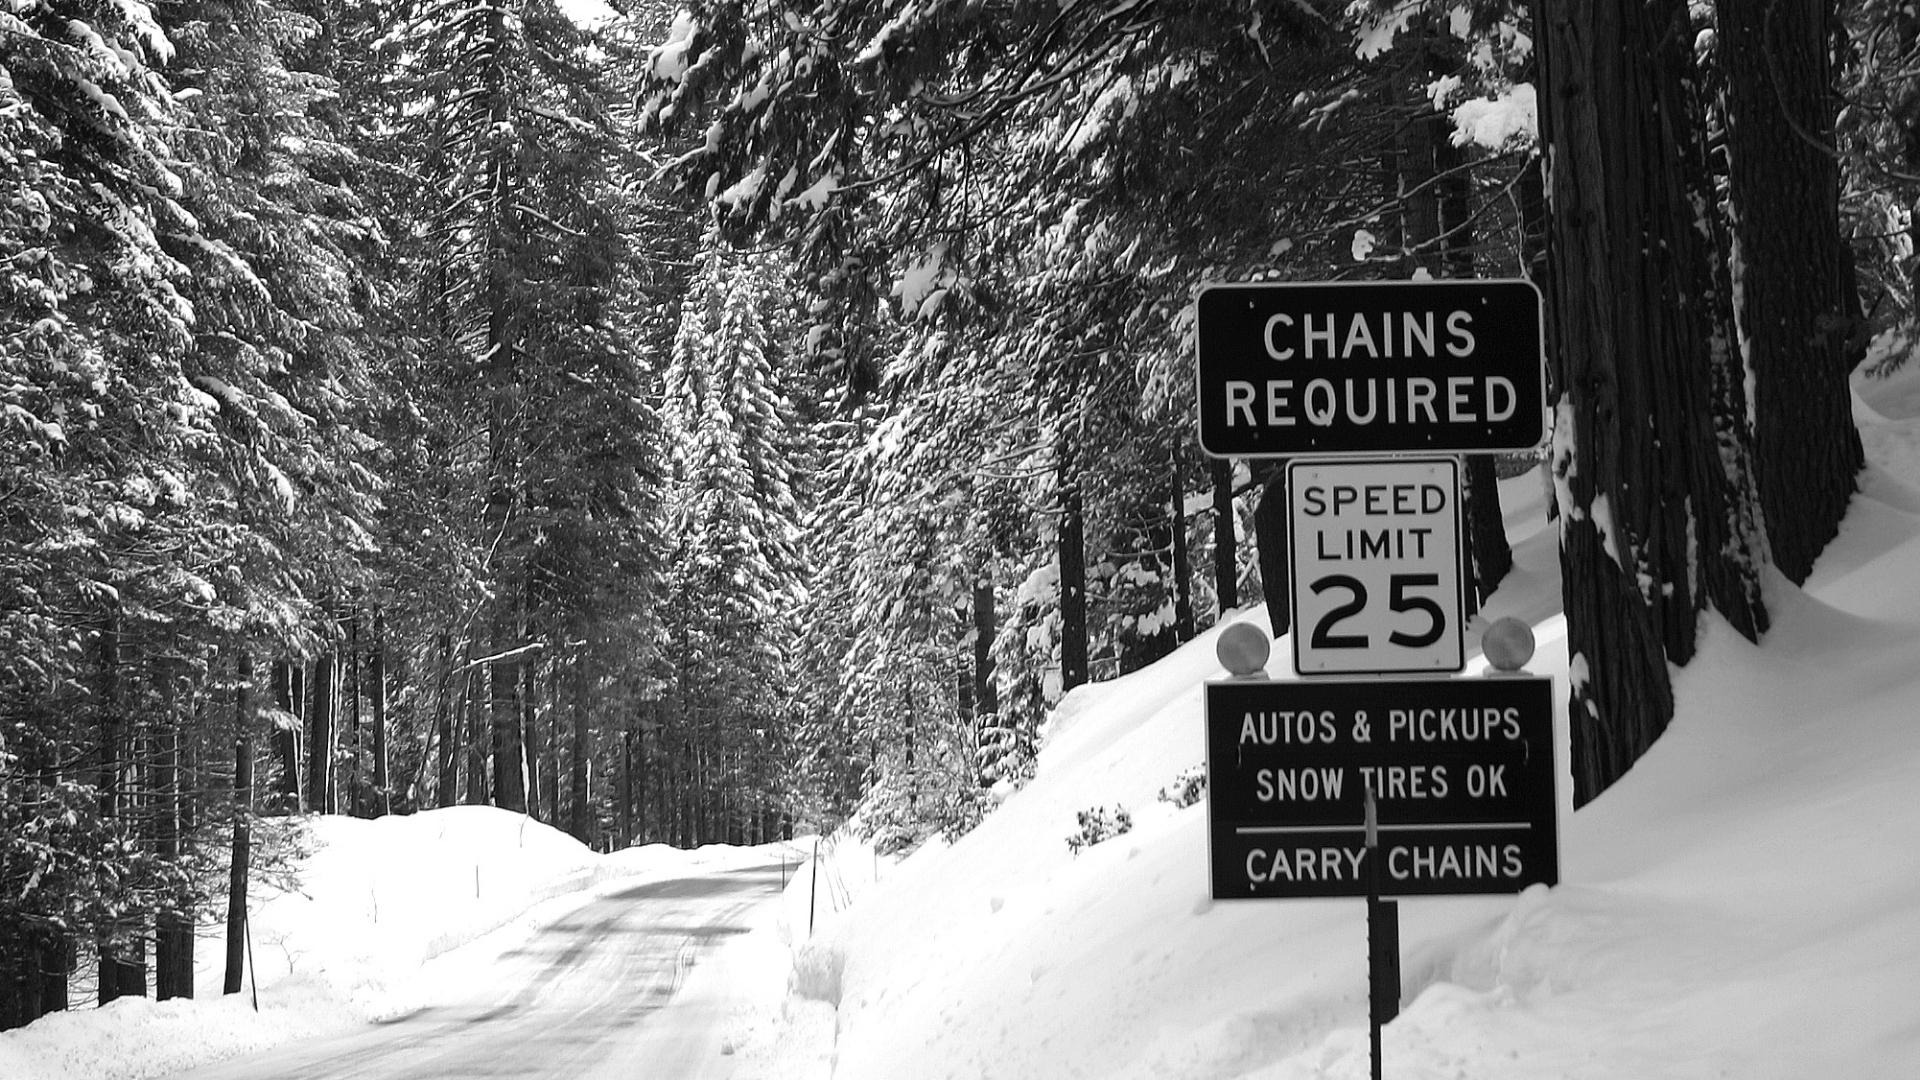 Sign indicating that snow tires or snow chains are required